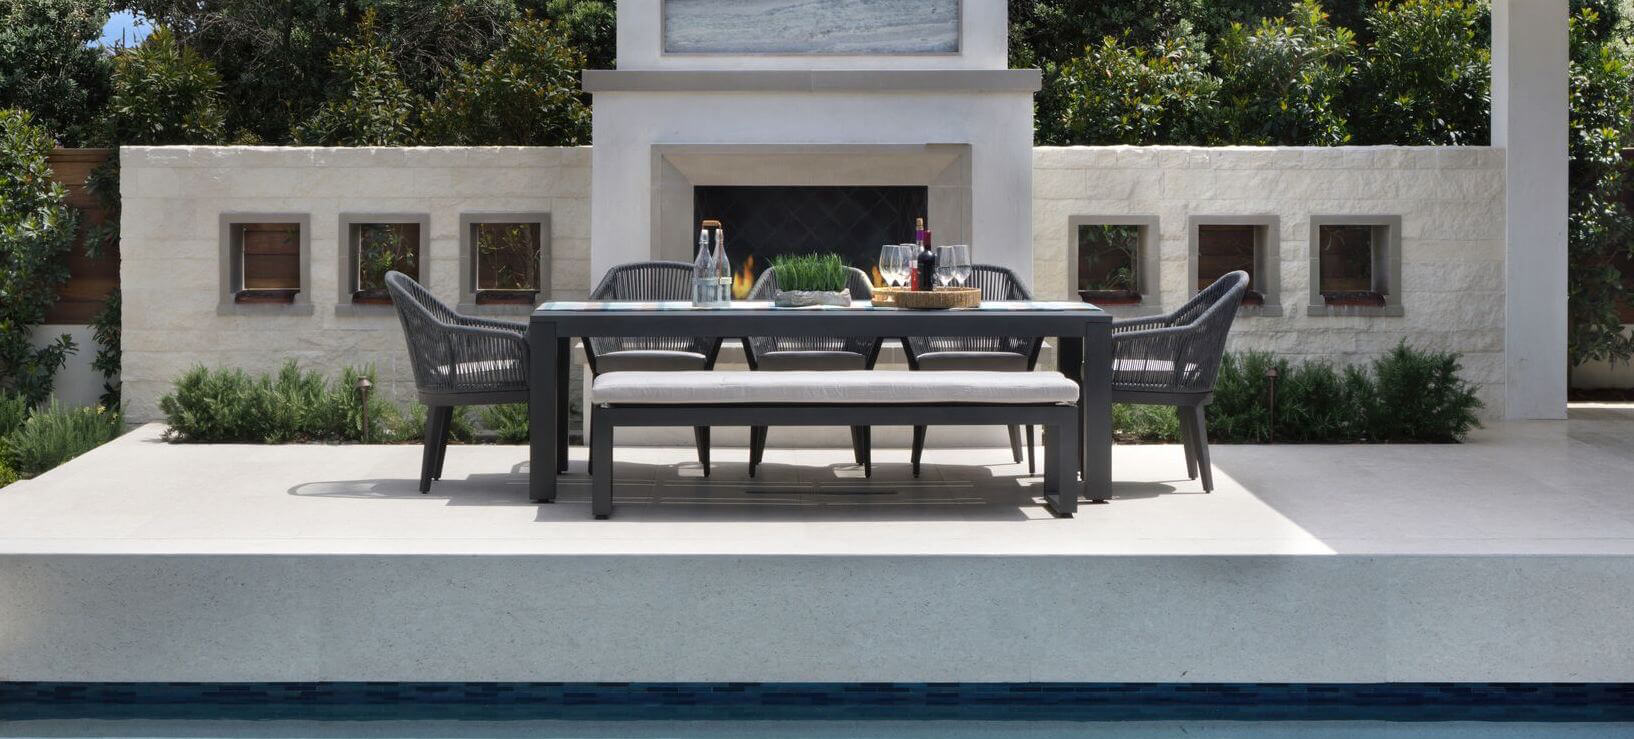 Sunset West Outdoor Patio Furniture, Sunset West Patio Chairs